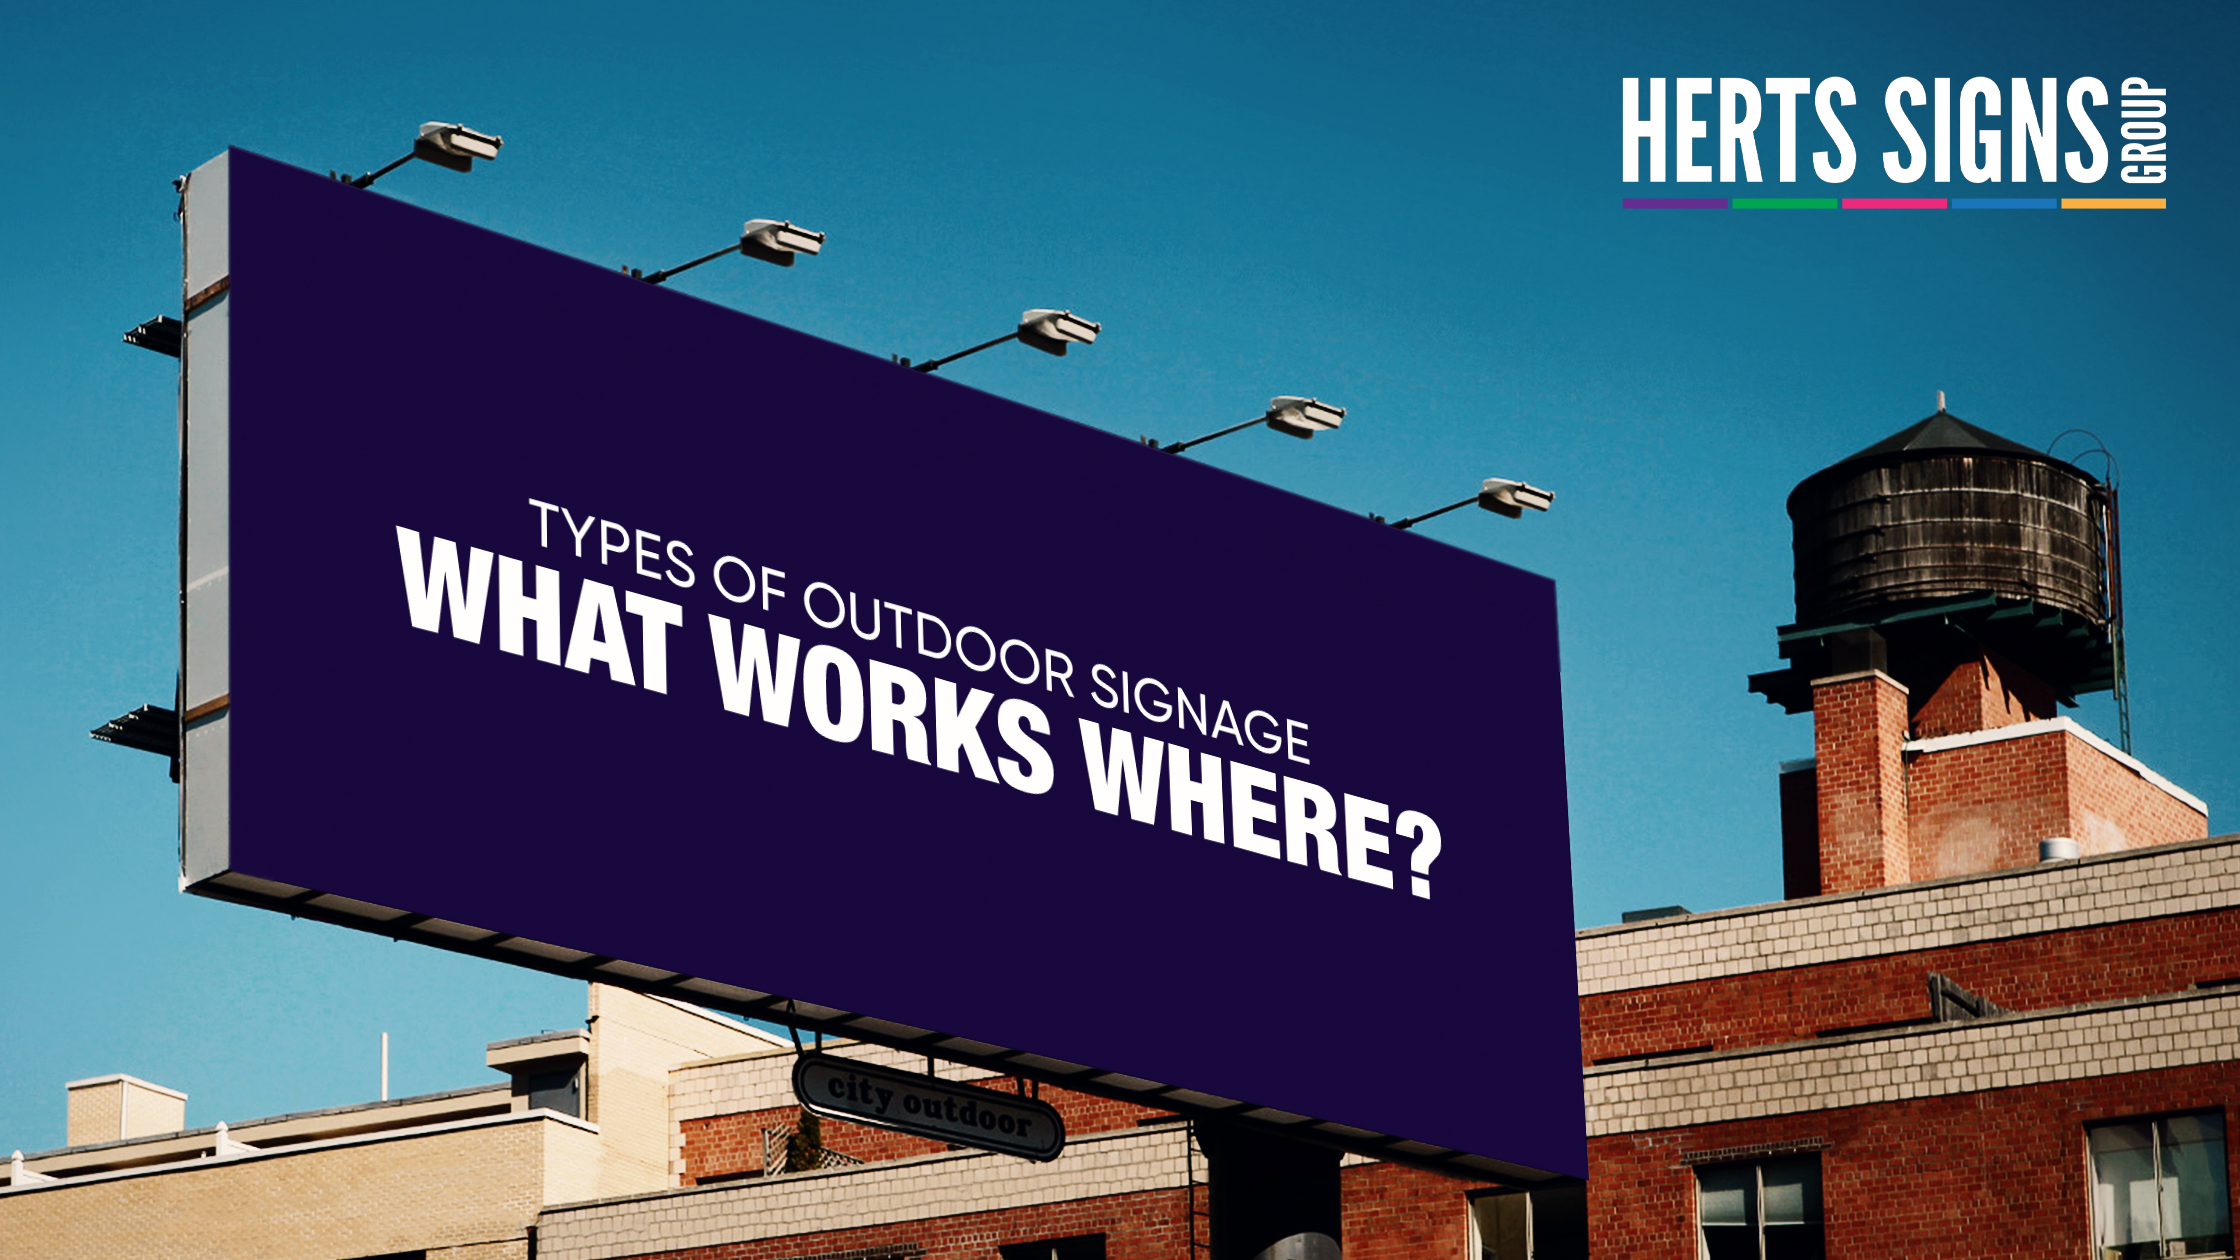 Types of Outdoor Signage: What Works Where?